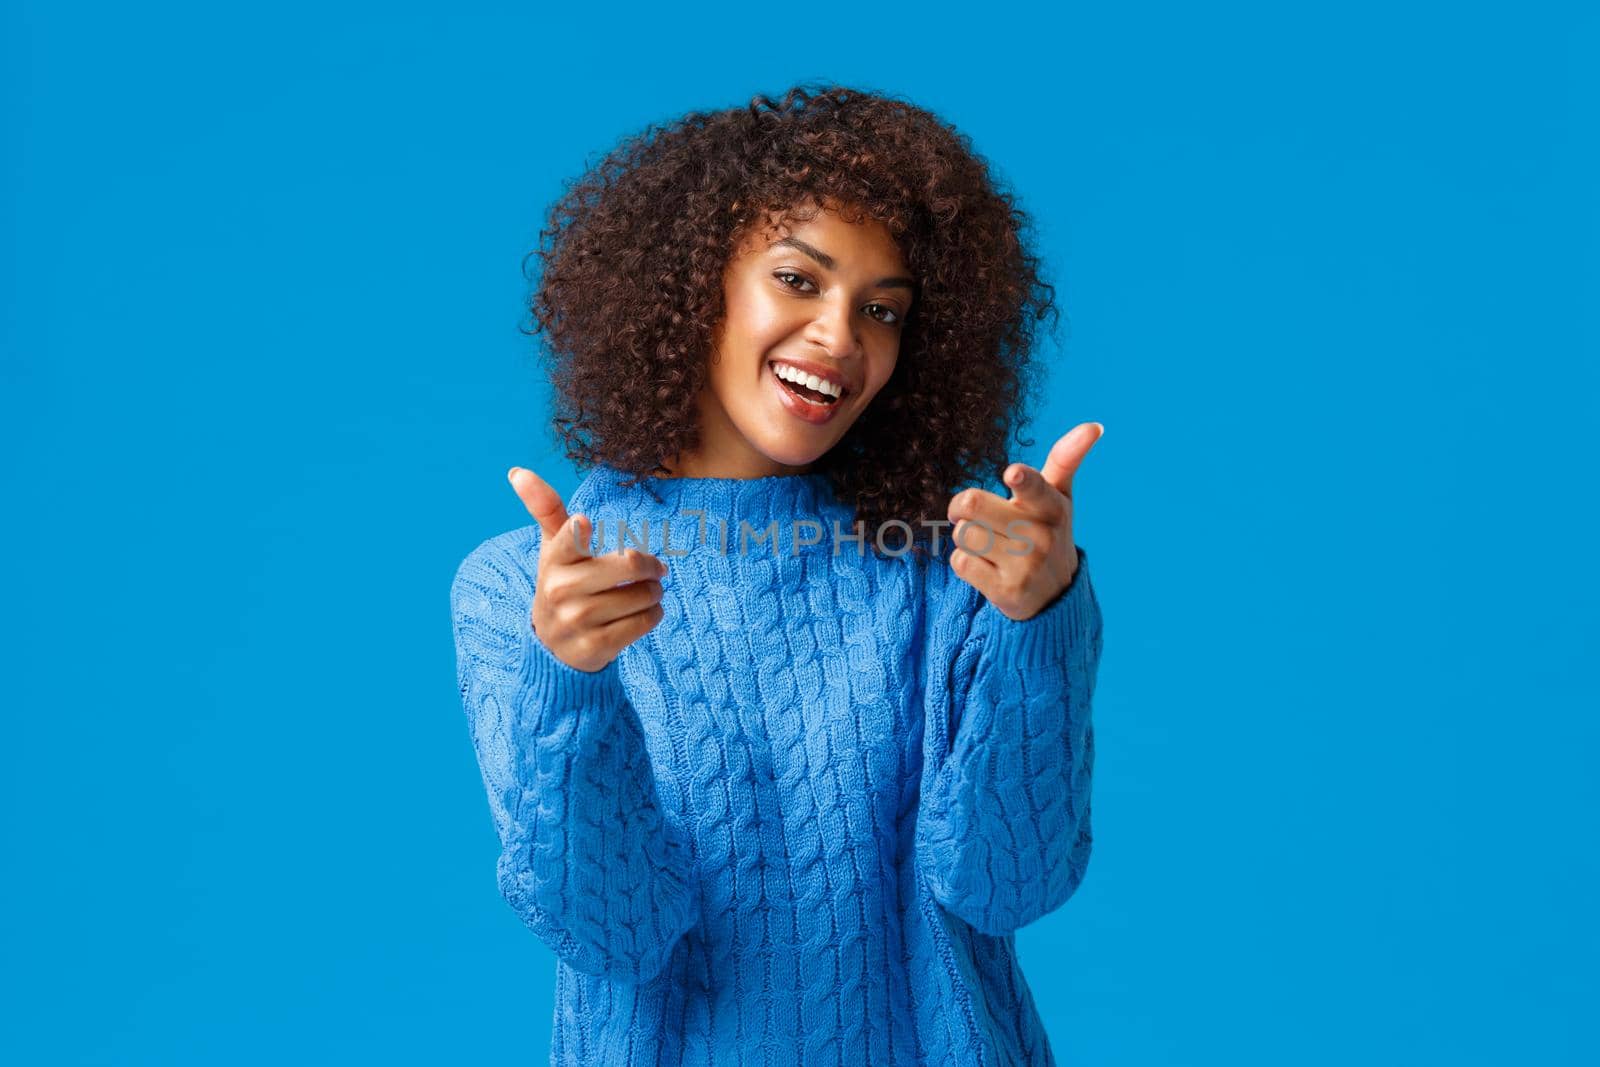 You cool, good job congratulations. Lucky cute african-american female with afro haircut, winter sweater, tilt head lovely smiling and pointing fingers camera as seeing friend and encourage her.